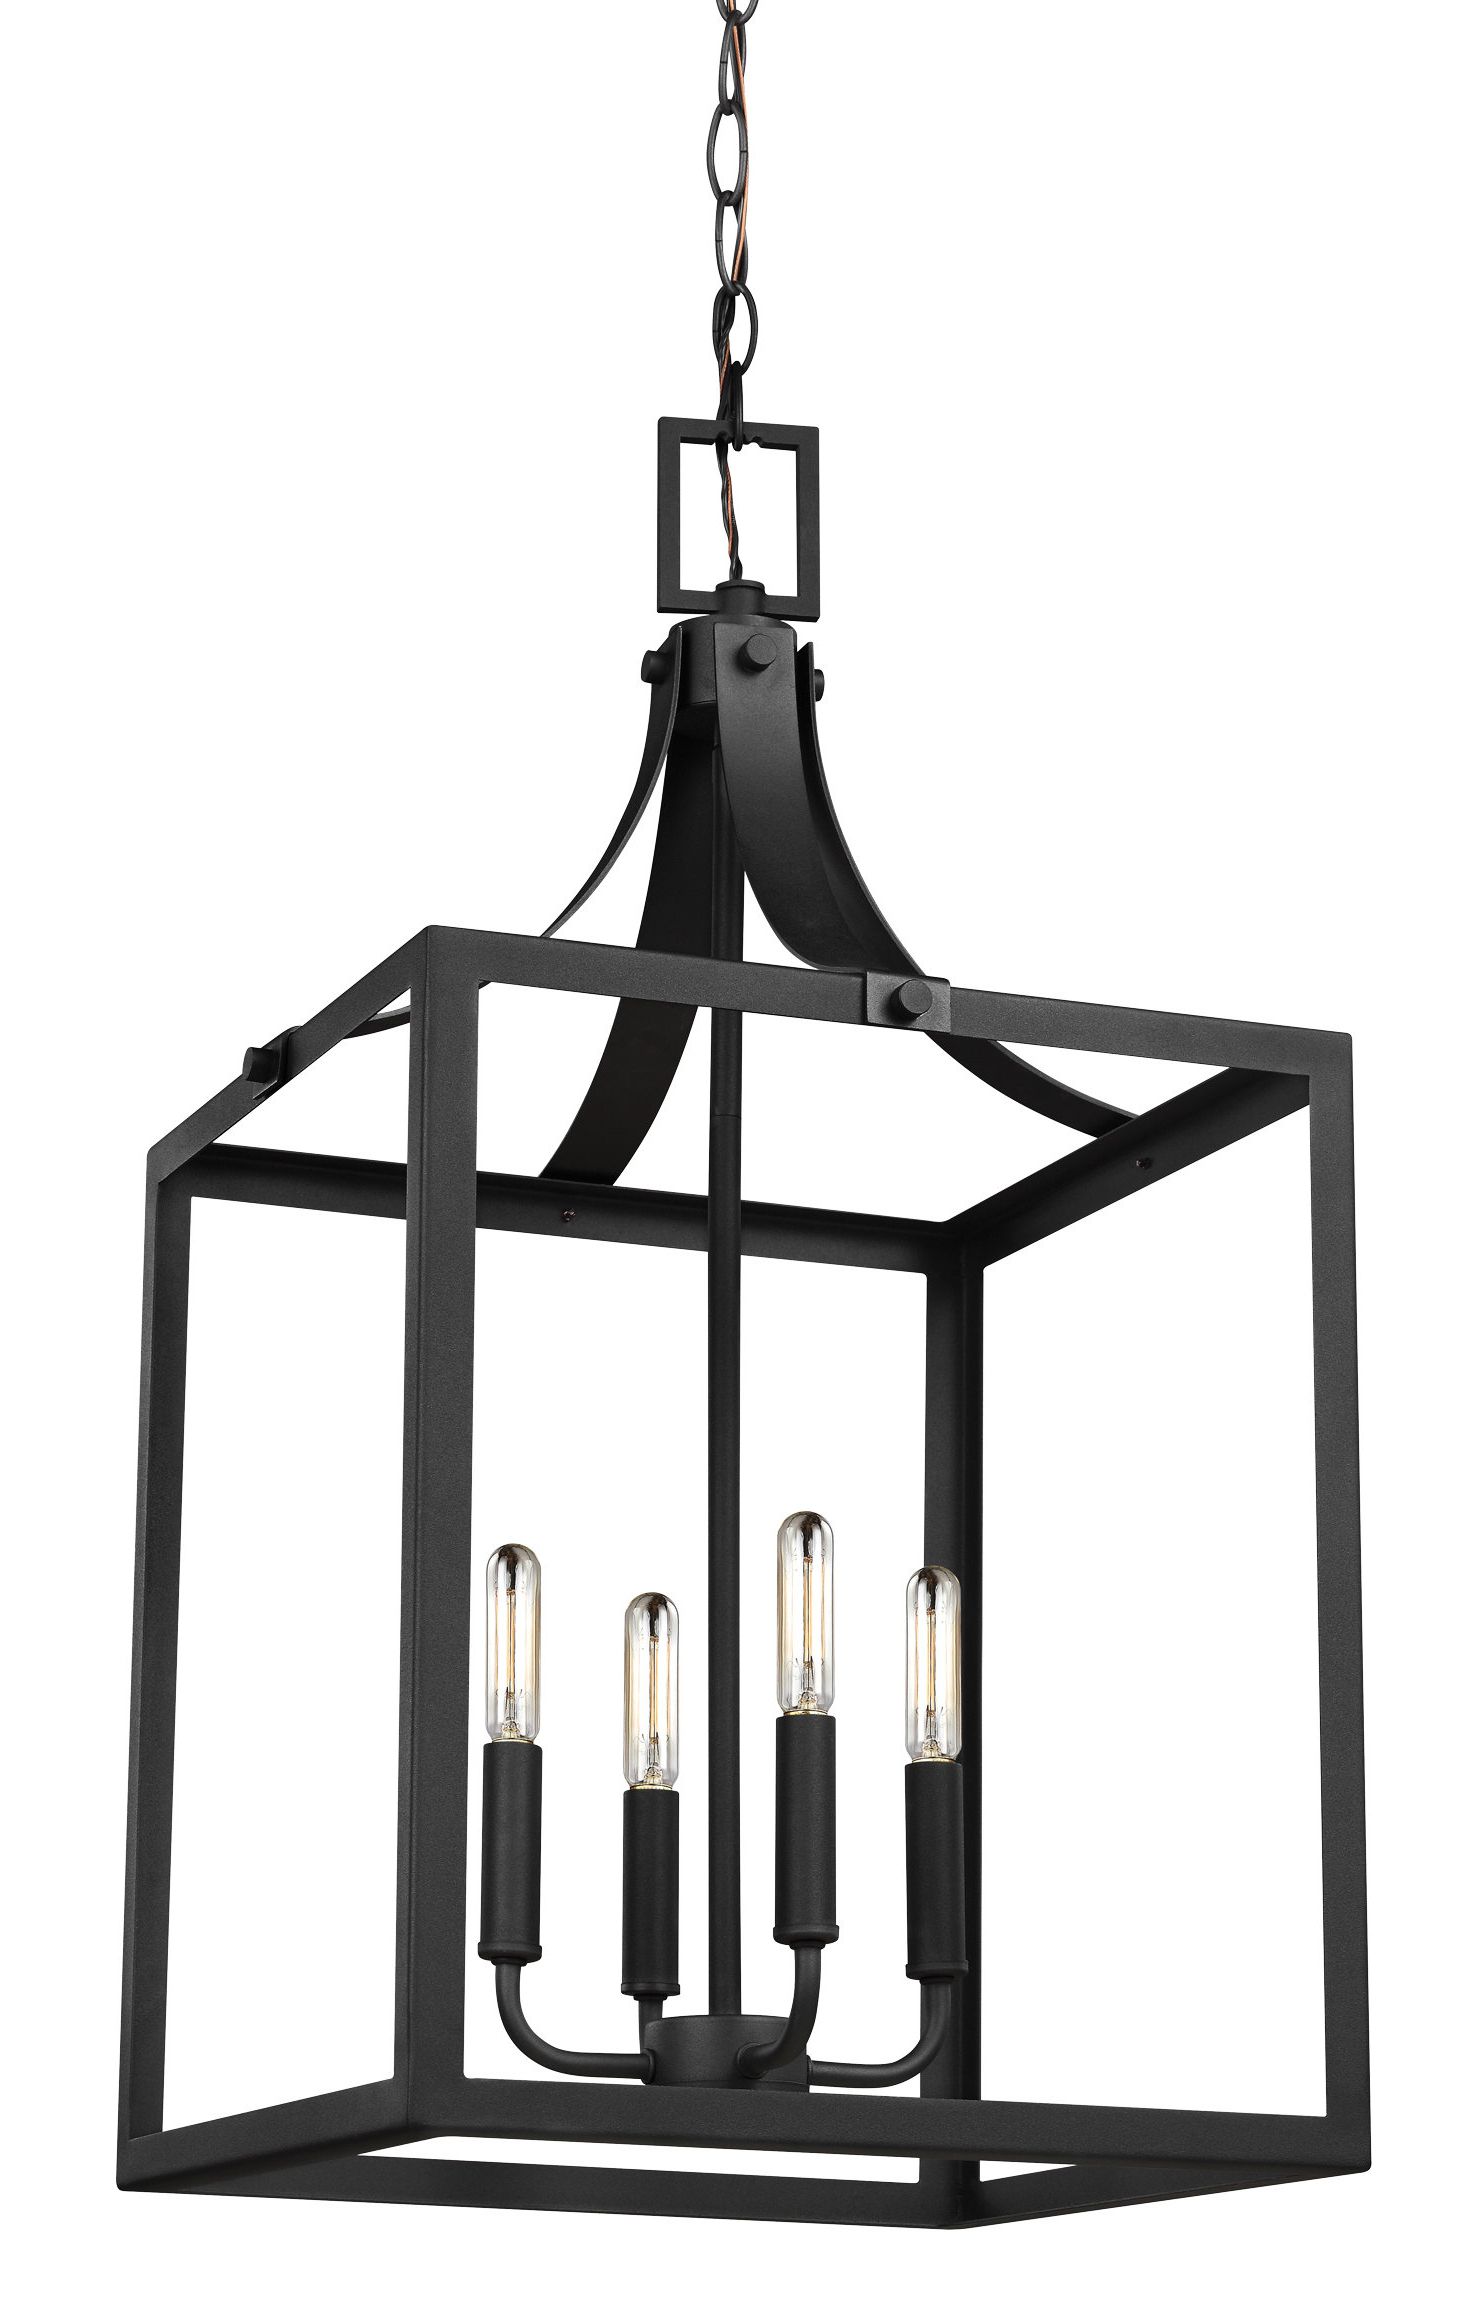 Gracie Oaks Sherri Ann 4 Light Lantern Square / Rectangle Pendant With Most Recently Released Thorne 6 Light Lantern Square / Rectangle Pendants (View 14 of 25)